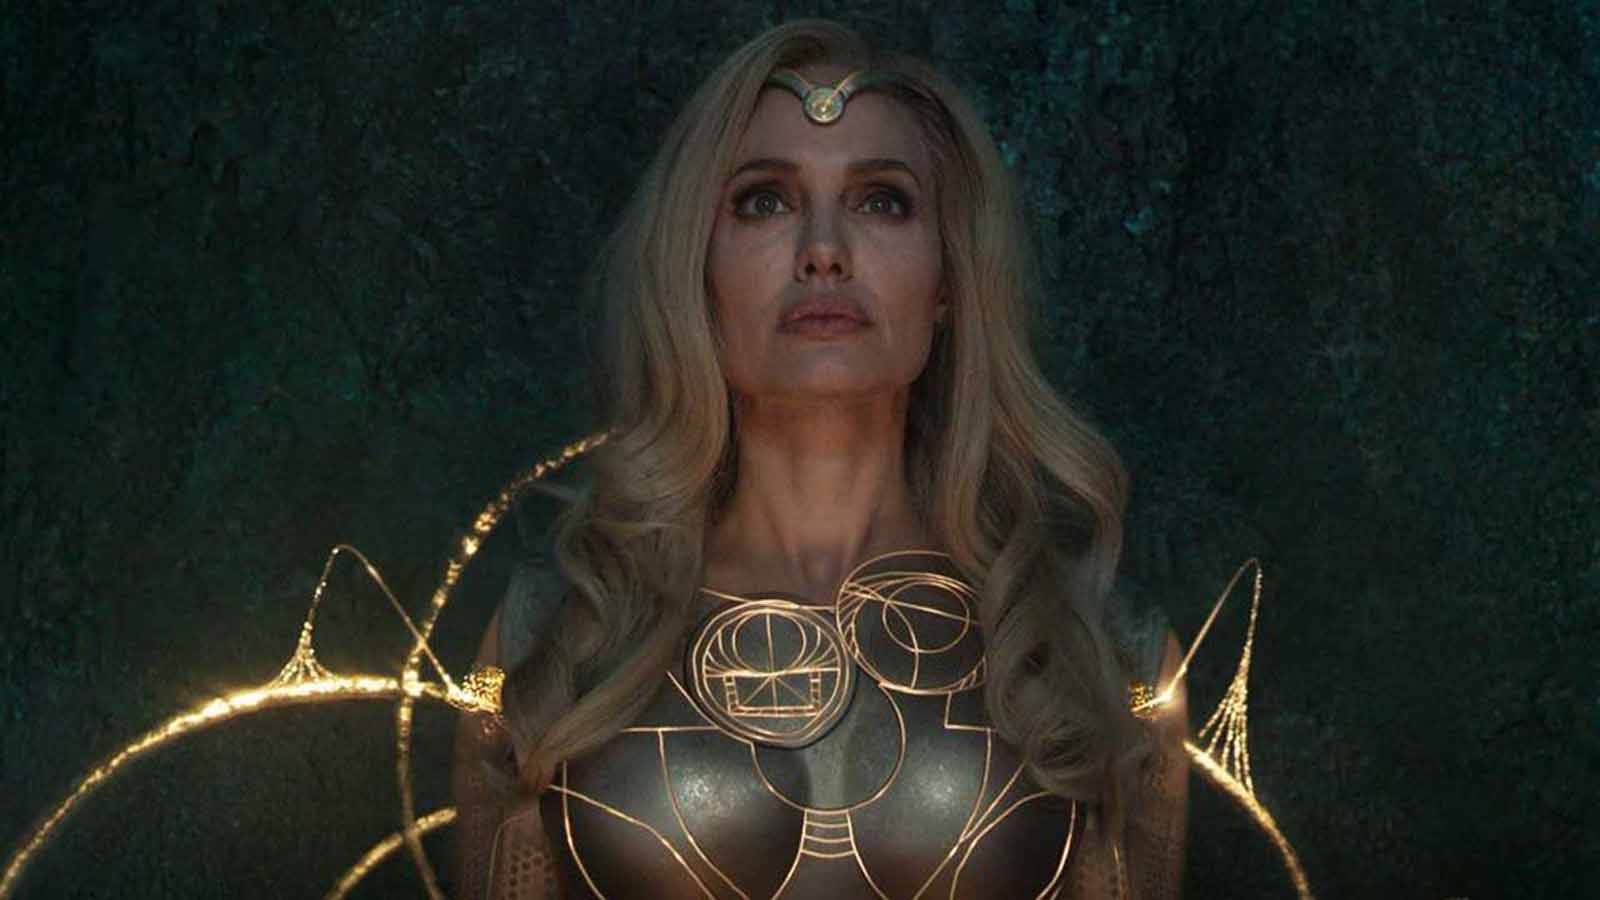 Watch On HBO Max ‘Eternals’ Free Streaming Online At Home